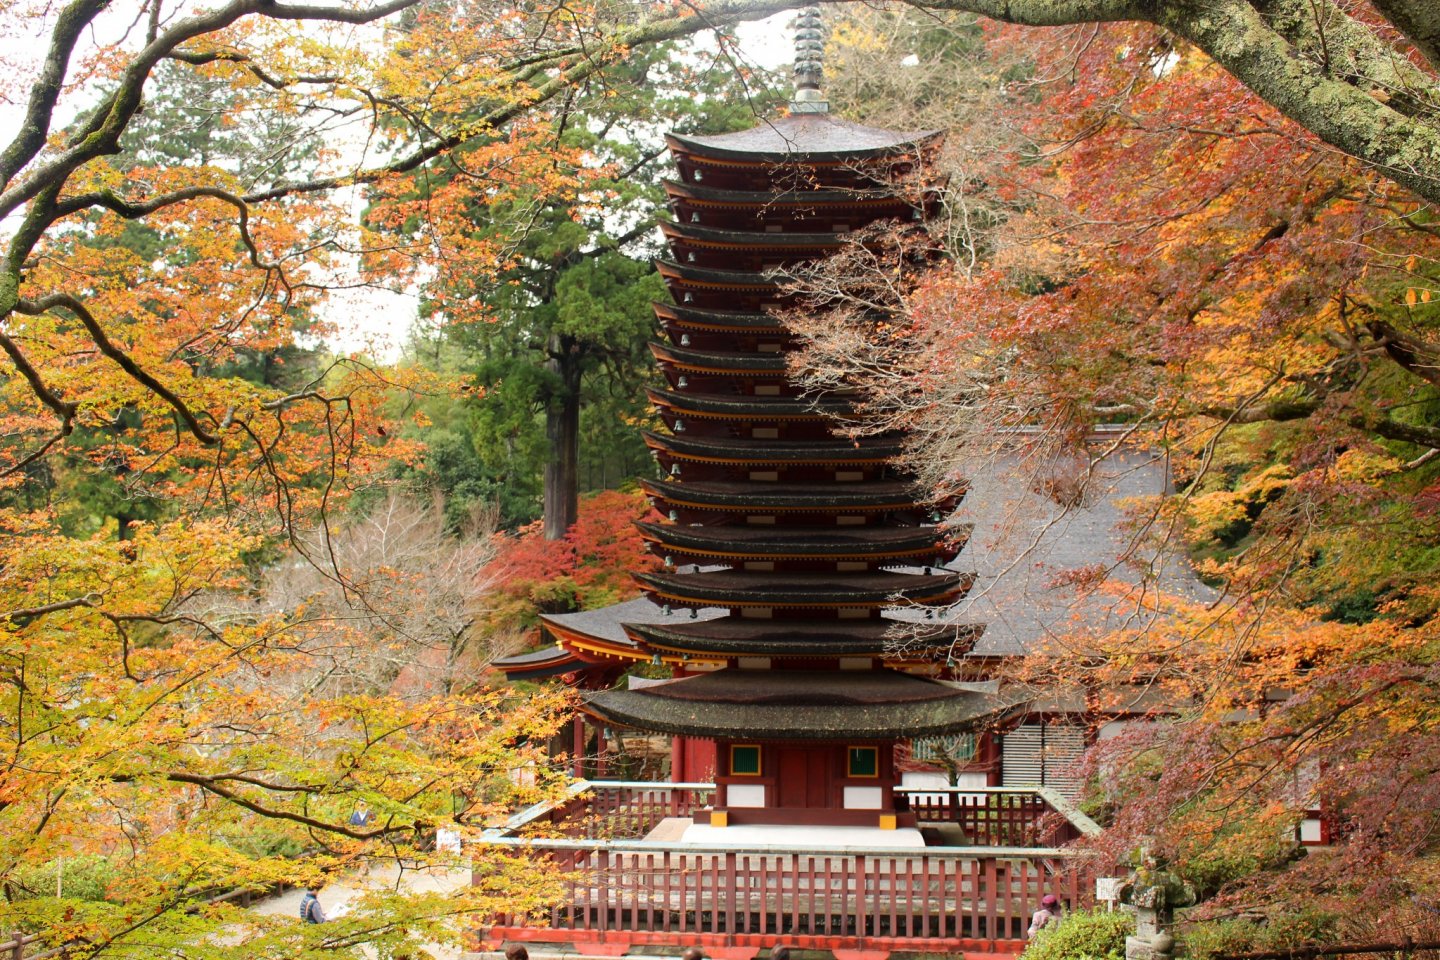 The unique 13-story pagoda from the Main Hall's stairs